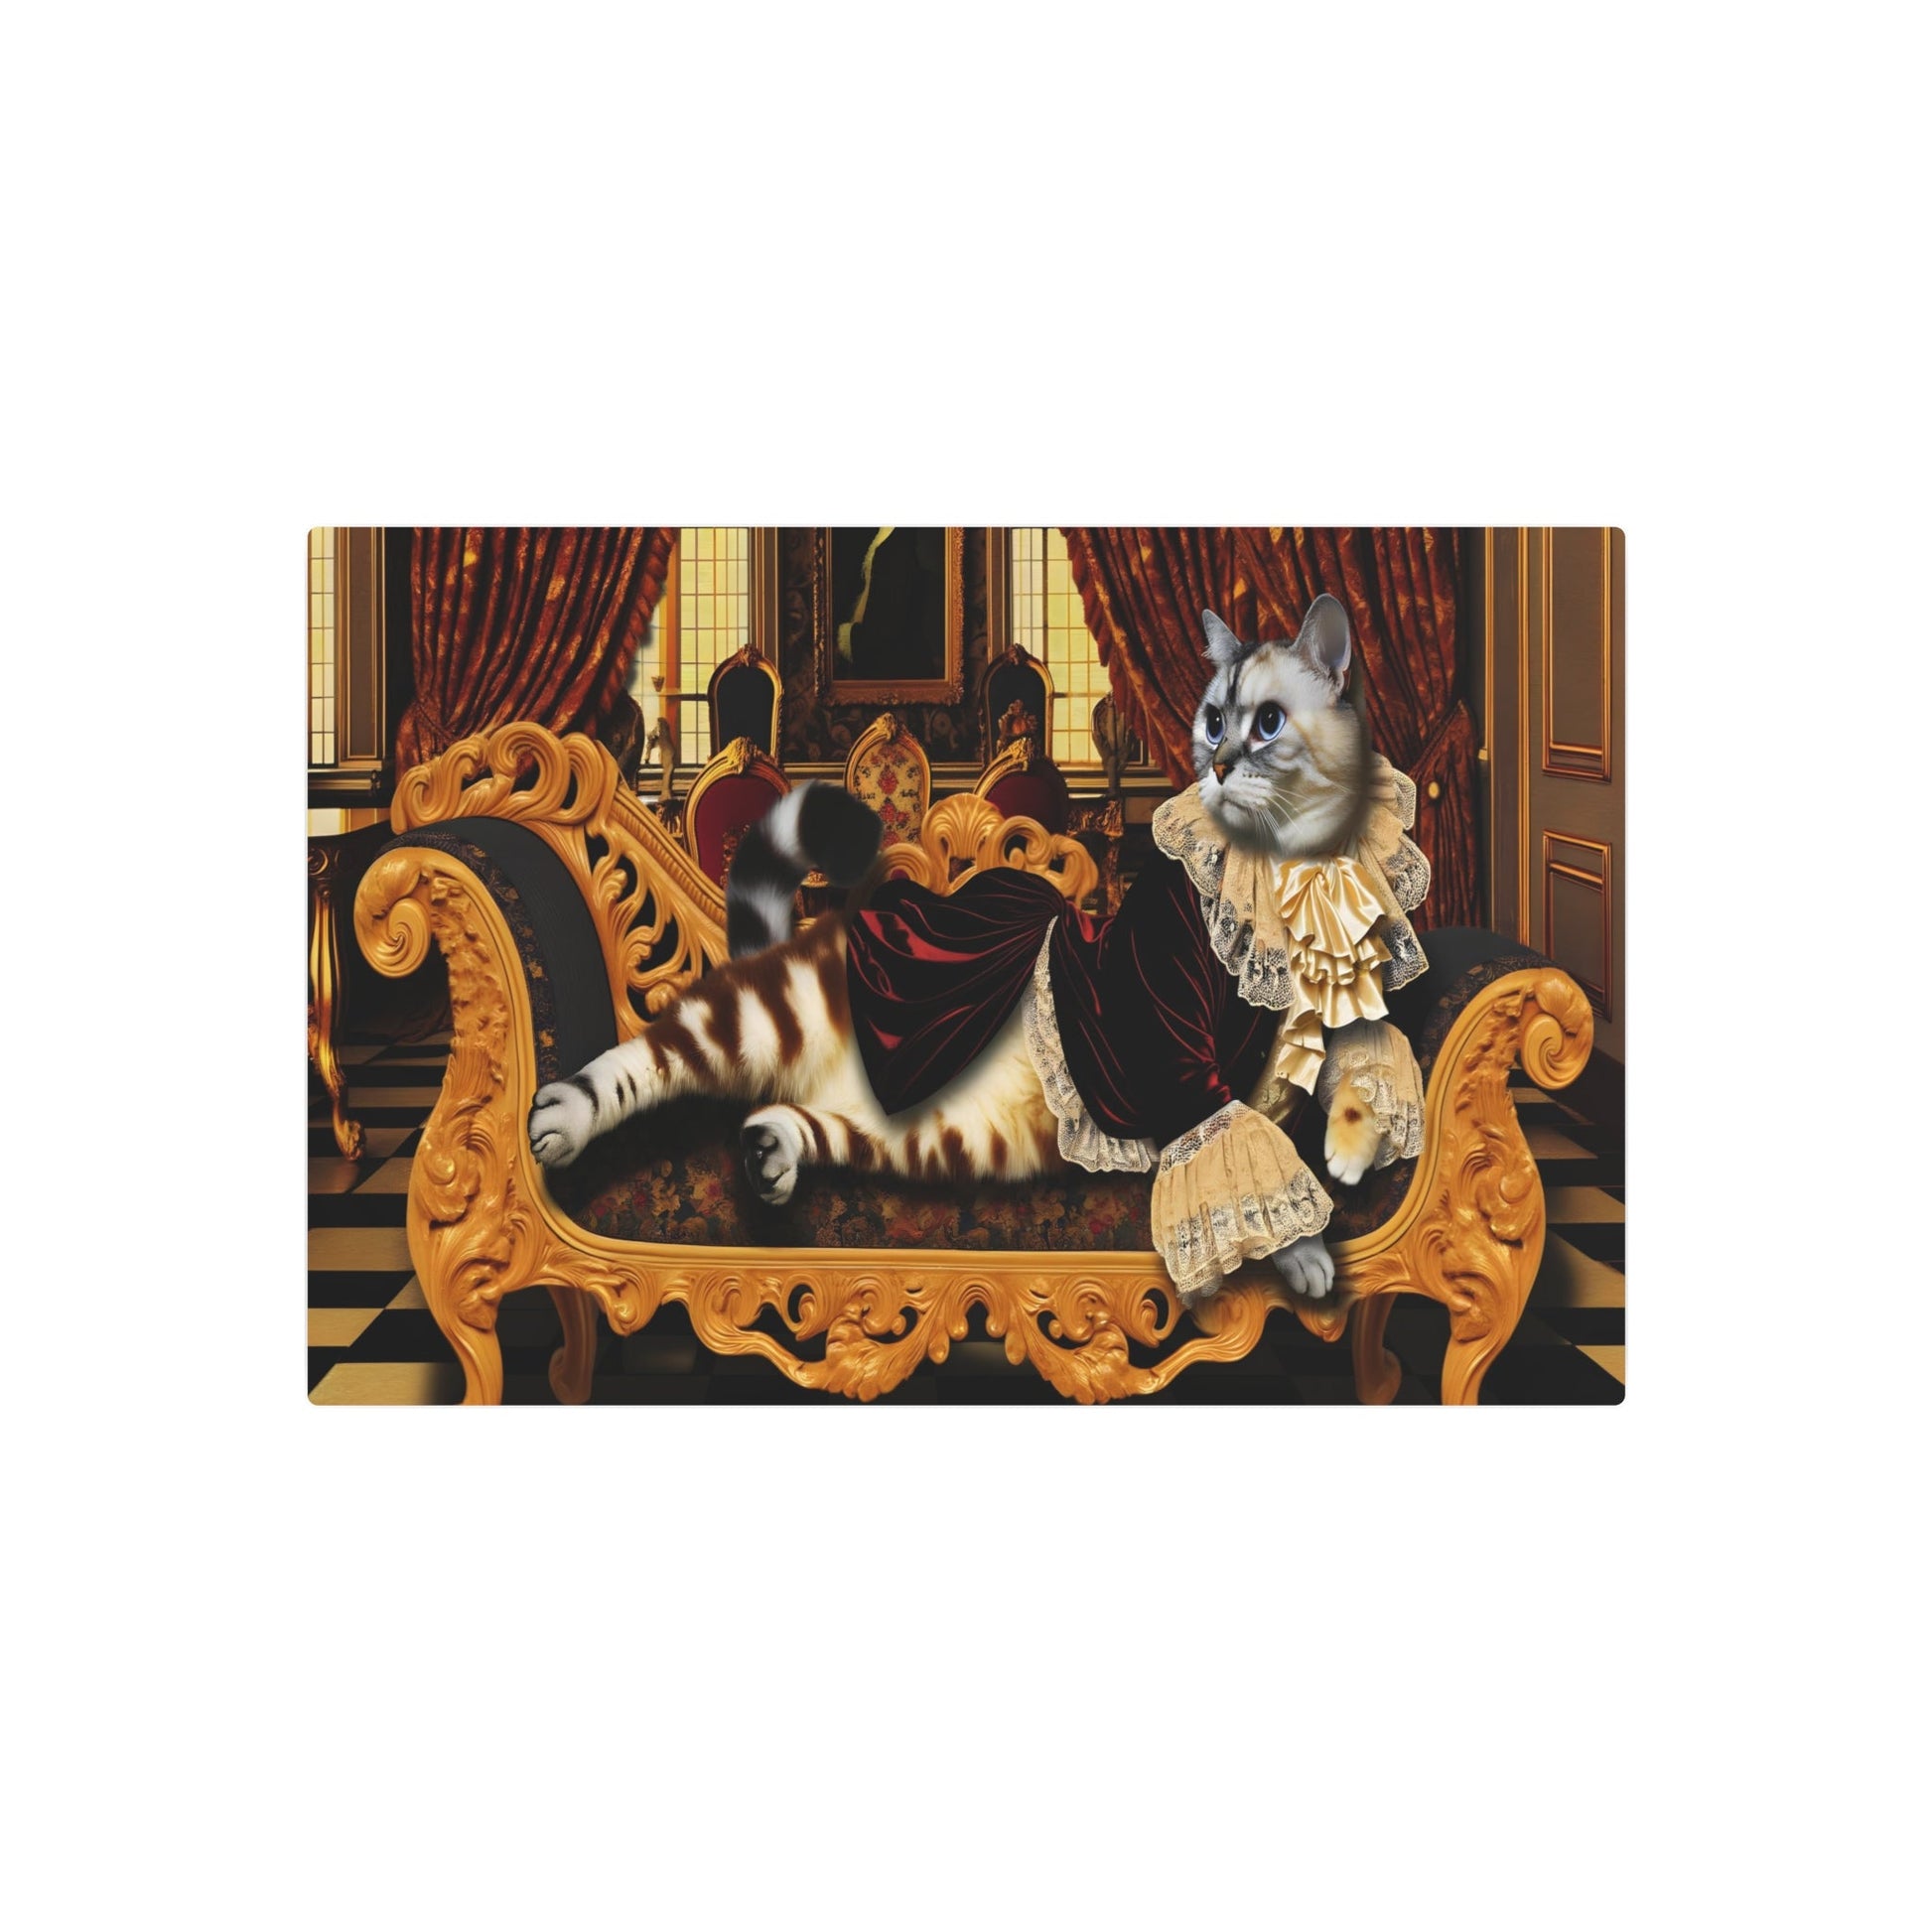 Metal Poster Art | "Rococo Art Style Cat Lounging in Extravagant Attire - Western Art Styles Category, Luxurious Velvet Drapes and Gold - Metal Poster Art 30″ x 20″ (Horizontal) 0.12''